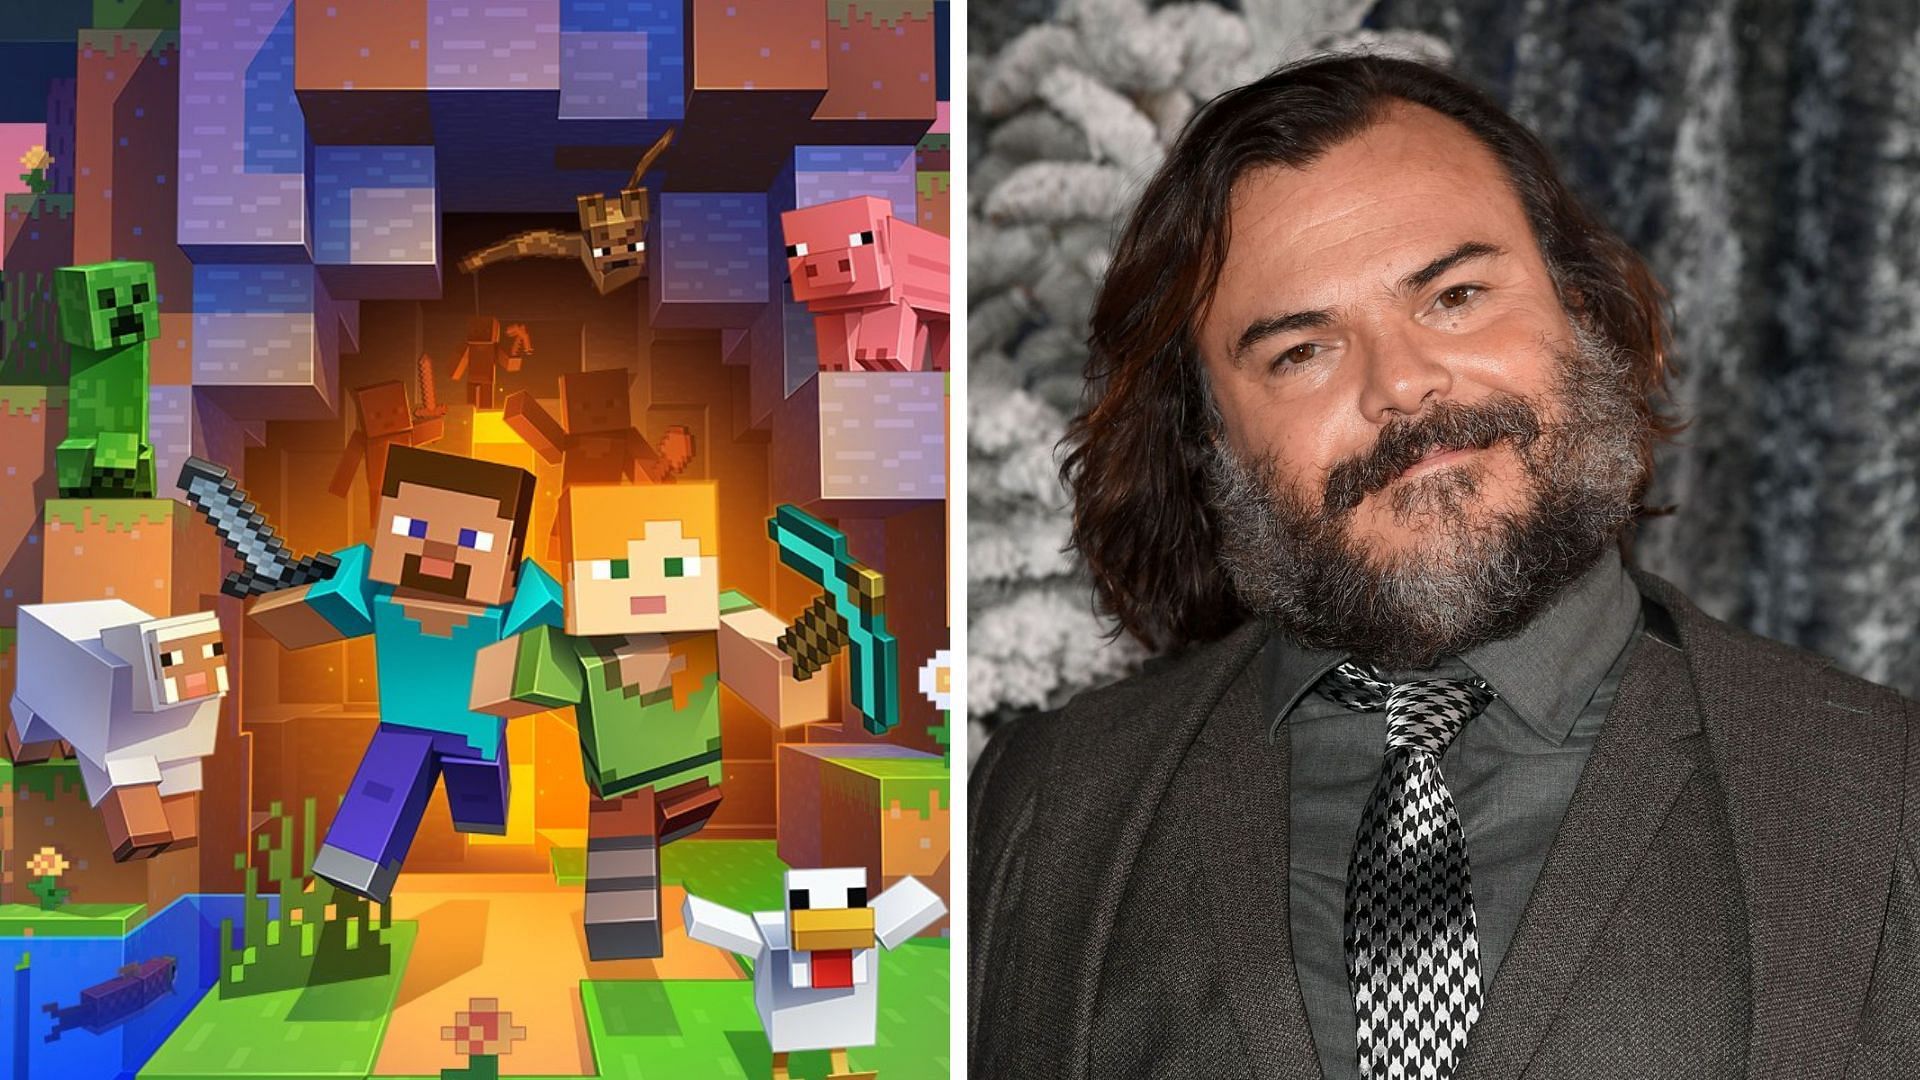 Minecraft official poster and Jack Black 